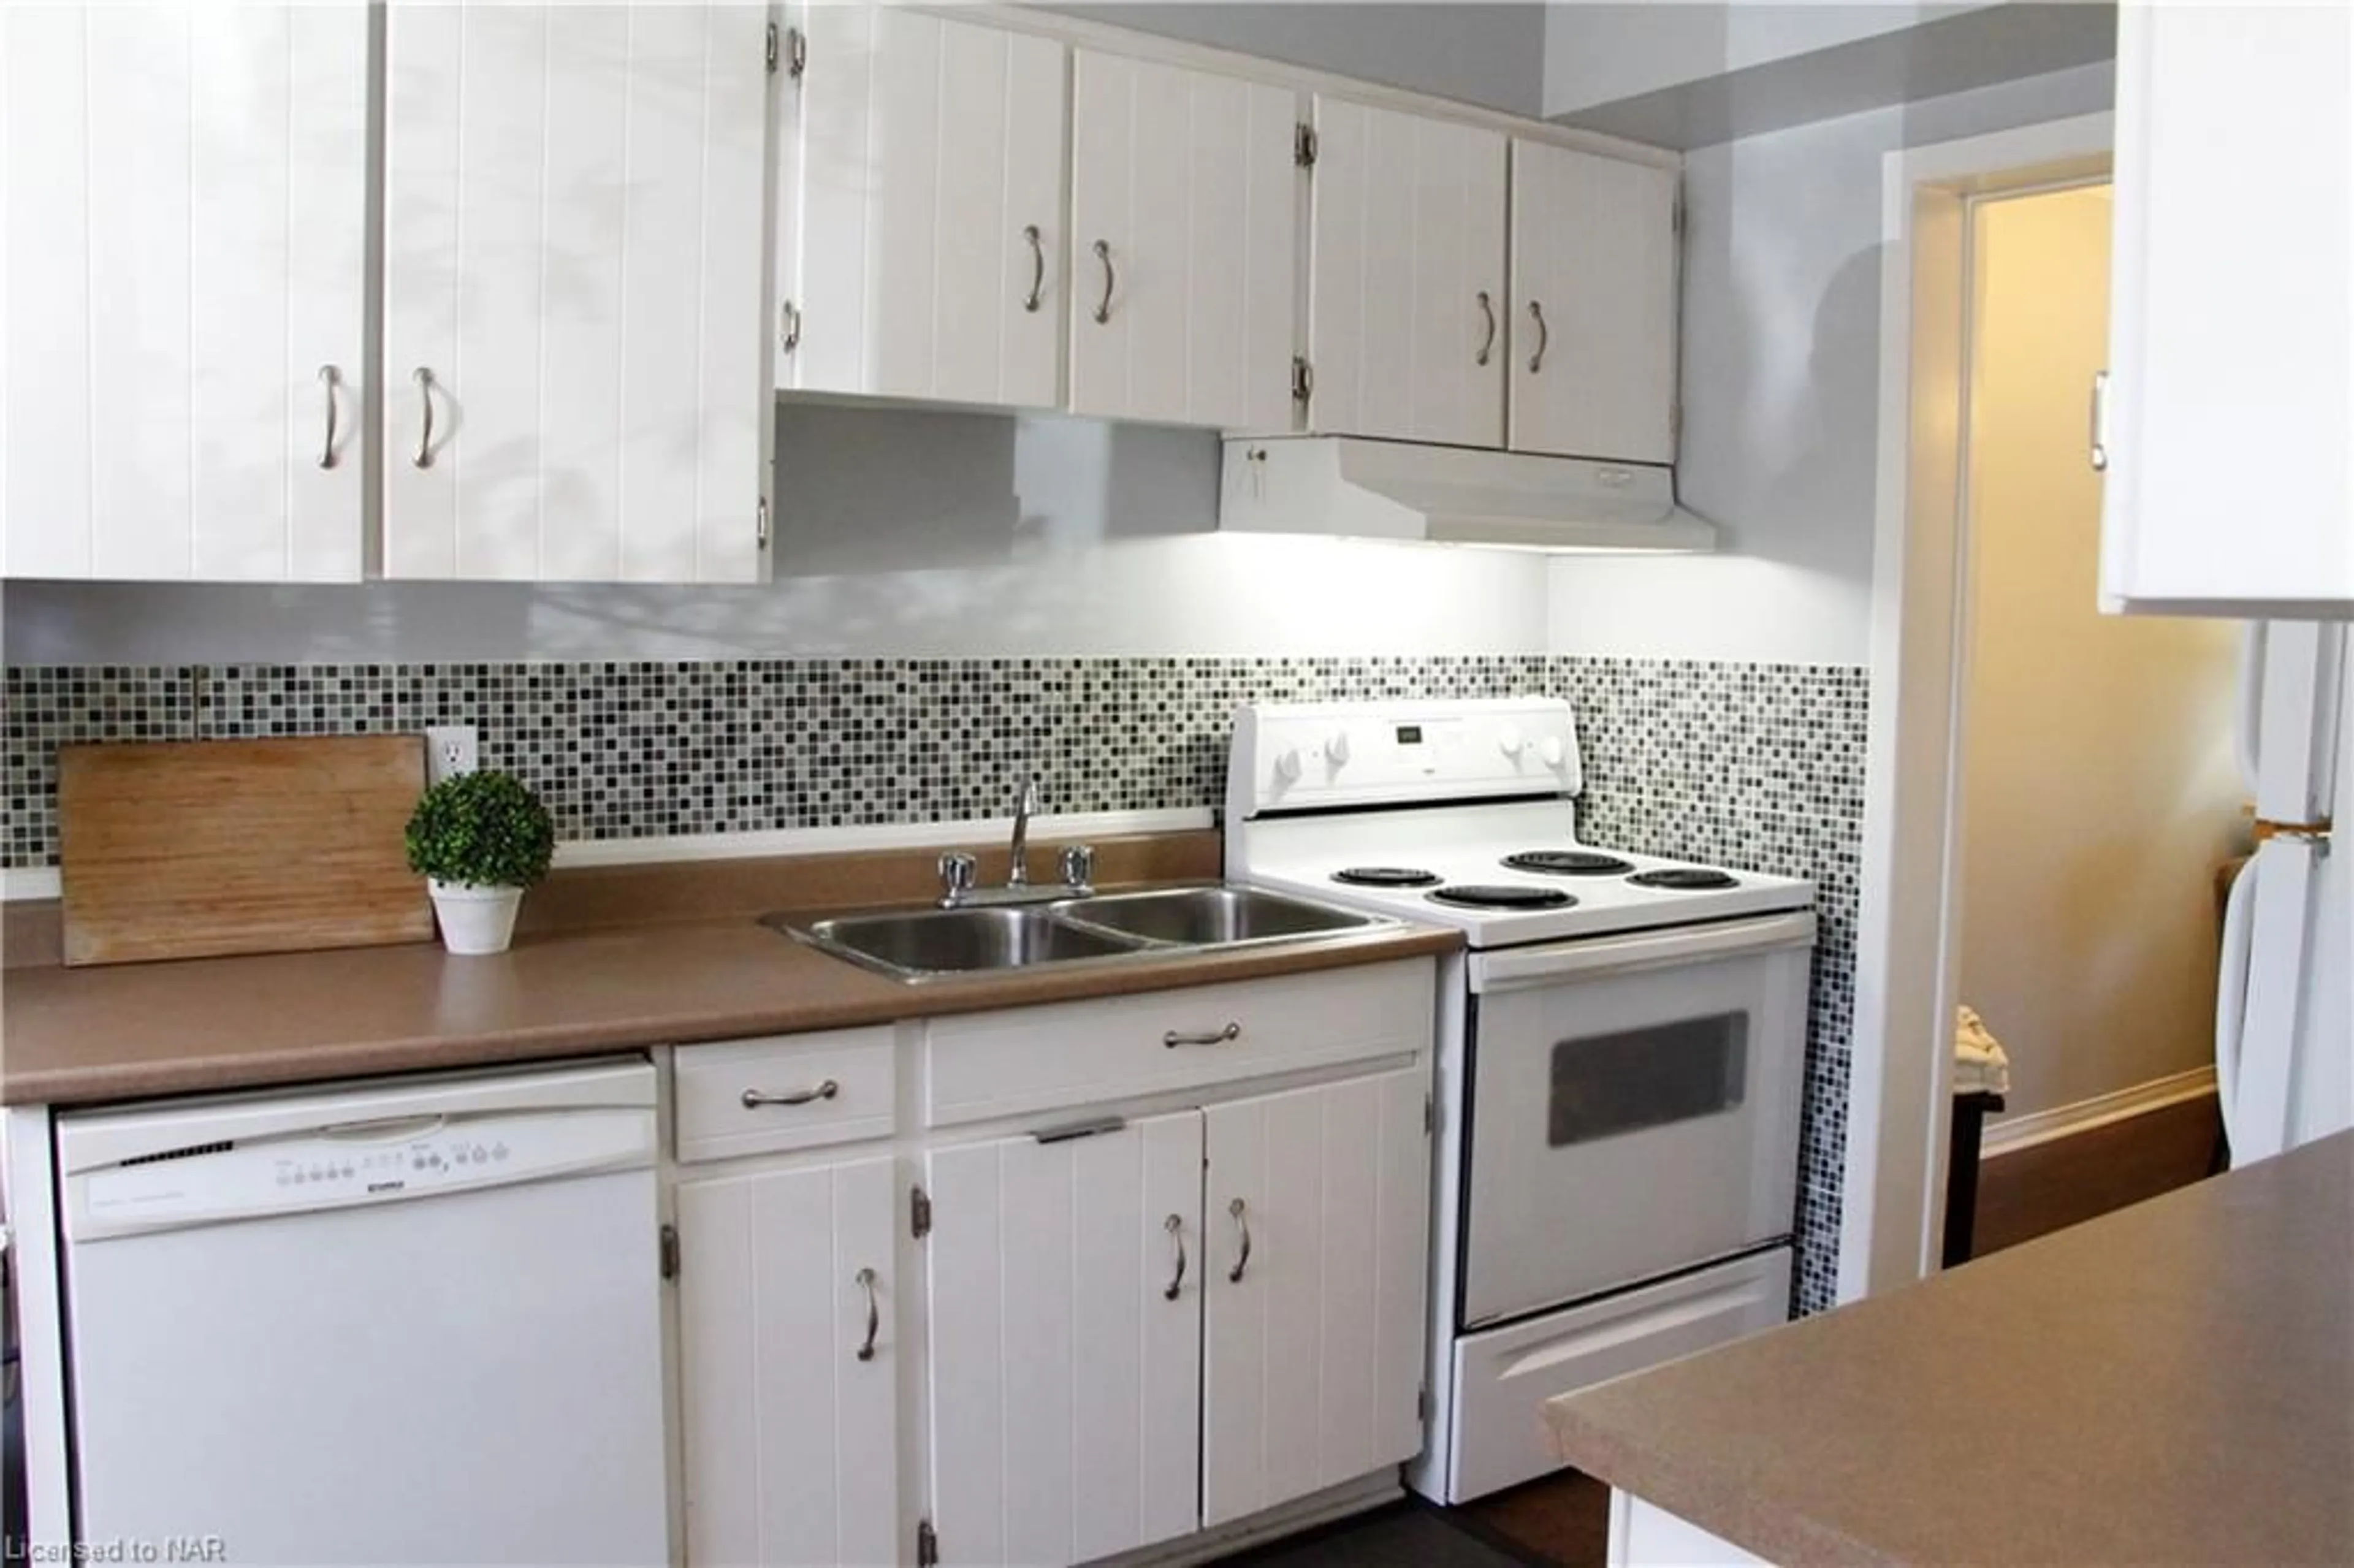 Standard kitchen for 77 Linwell Rd #65, St. Catharines Ontario L2N 6R1